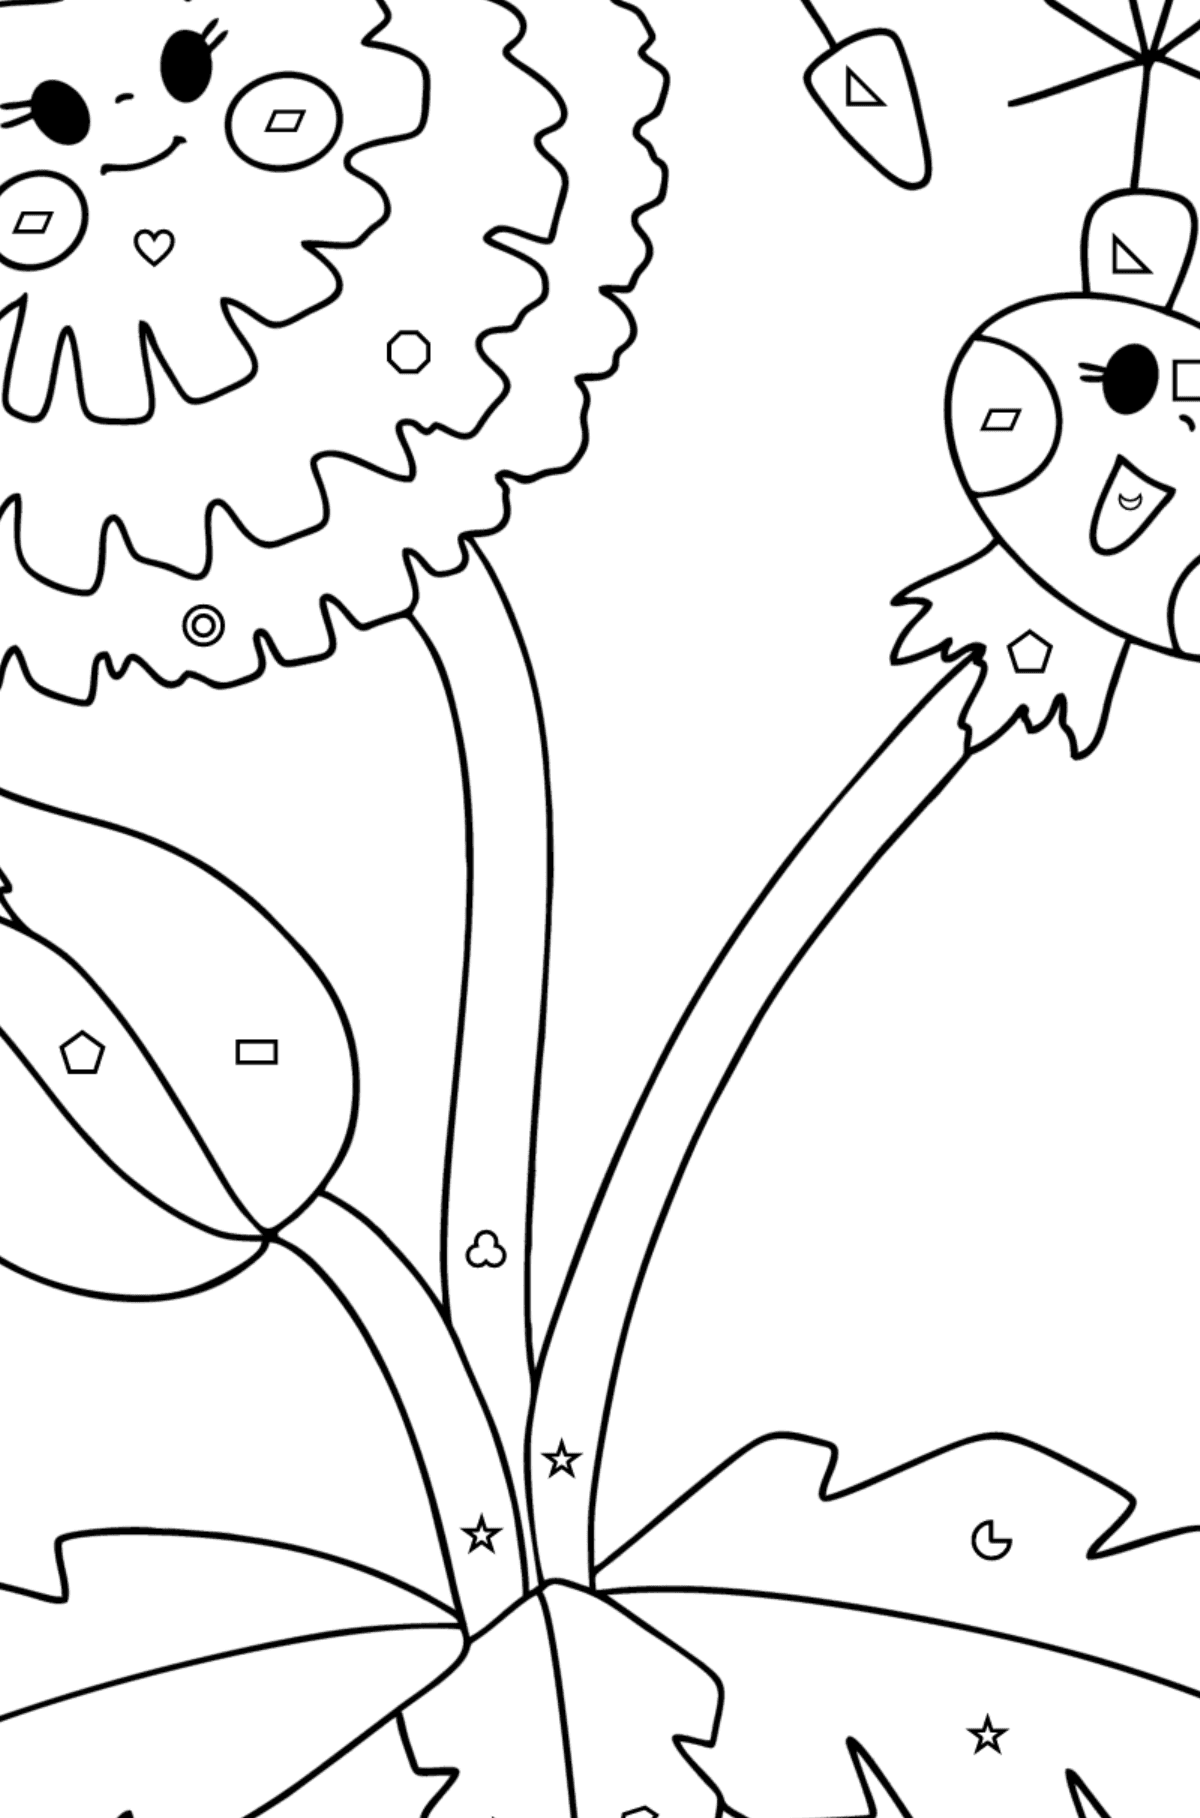 Dandelion with eyes coloring page - Coloring by Geometric Shapes for Kids